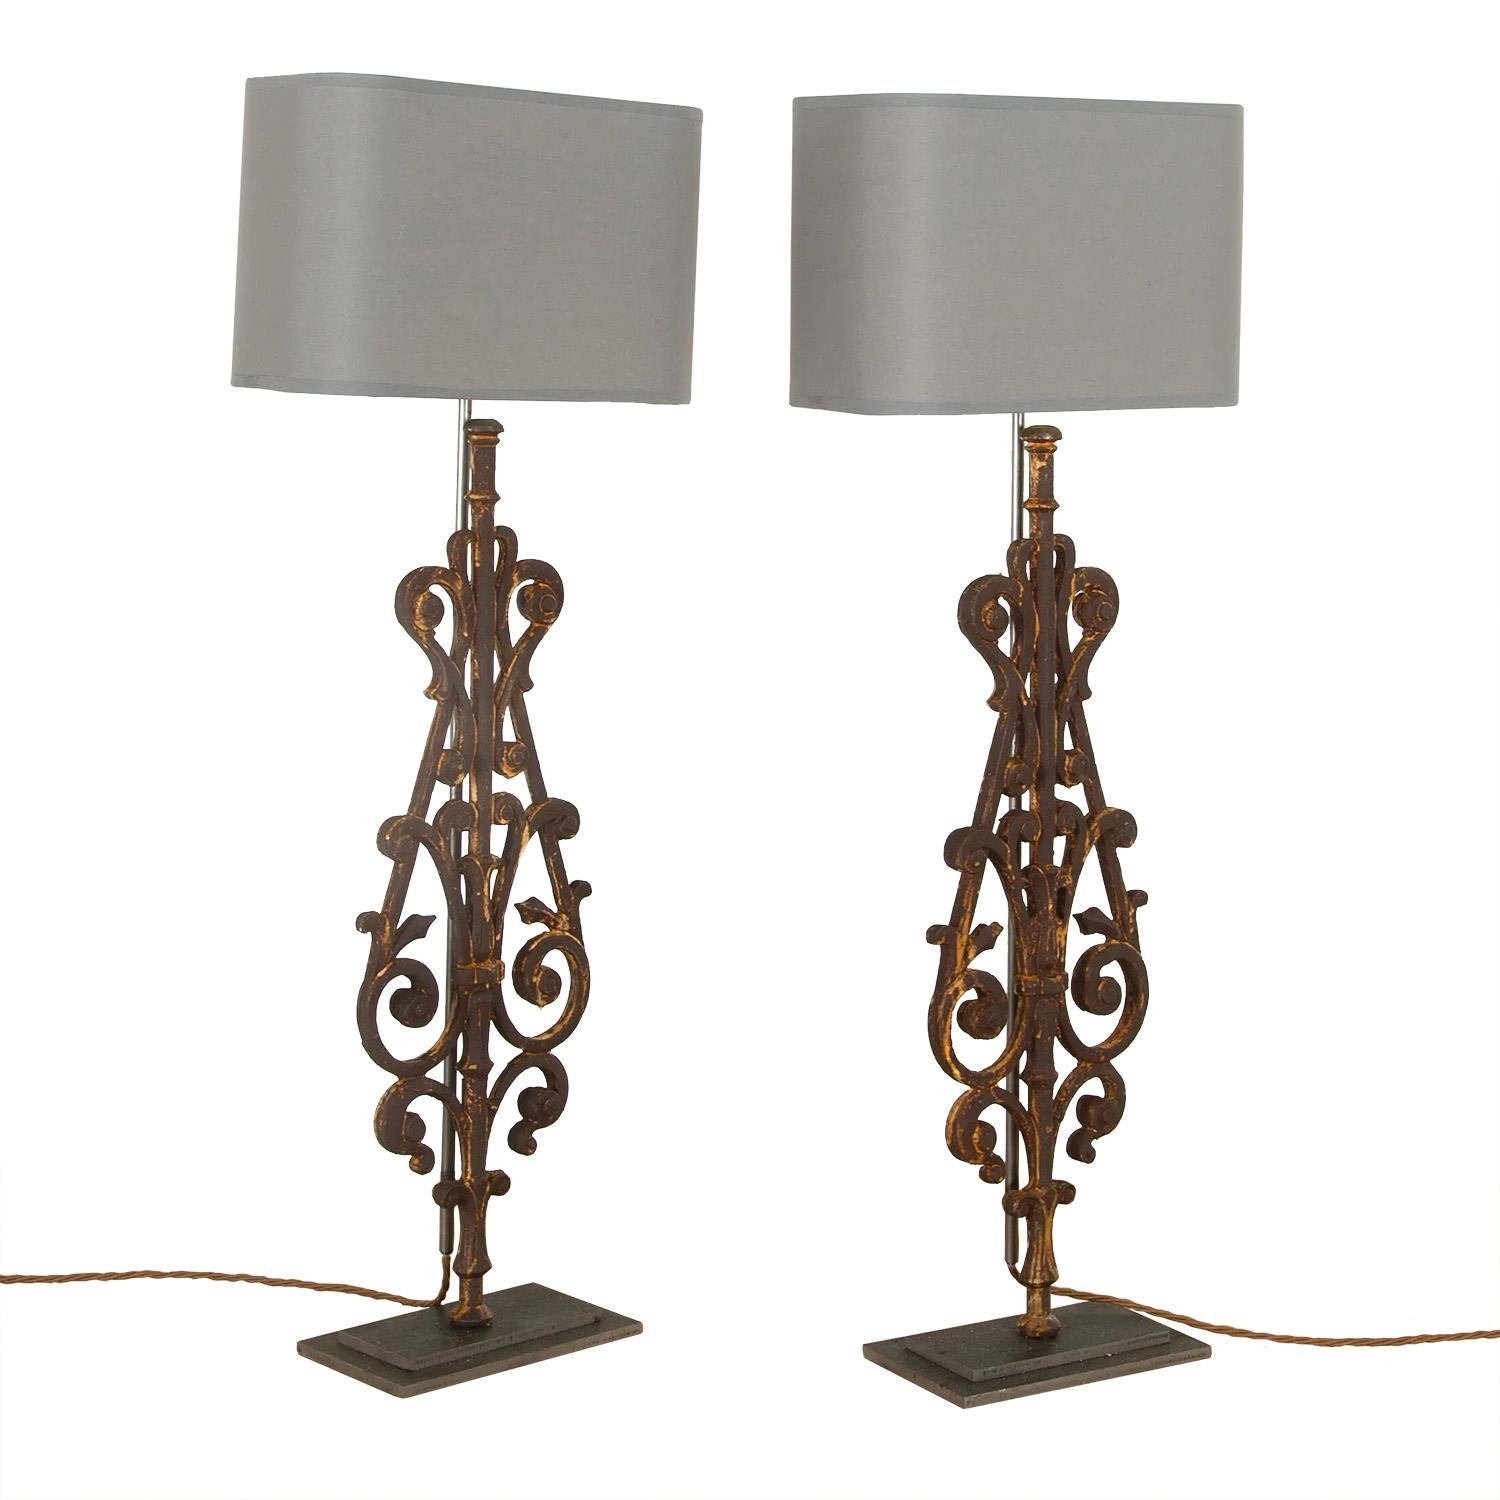 A decorative pair of lamps made in our artisan work shops using fragments of 19th century iron balustrade. This pieces has been rewired and PAT tested to UK standards.
  